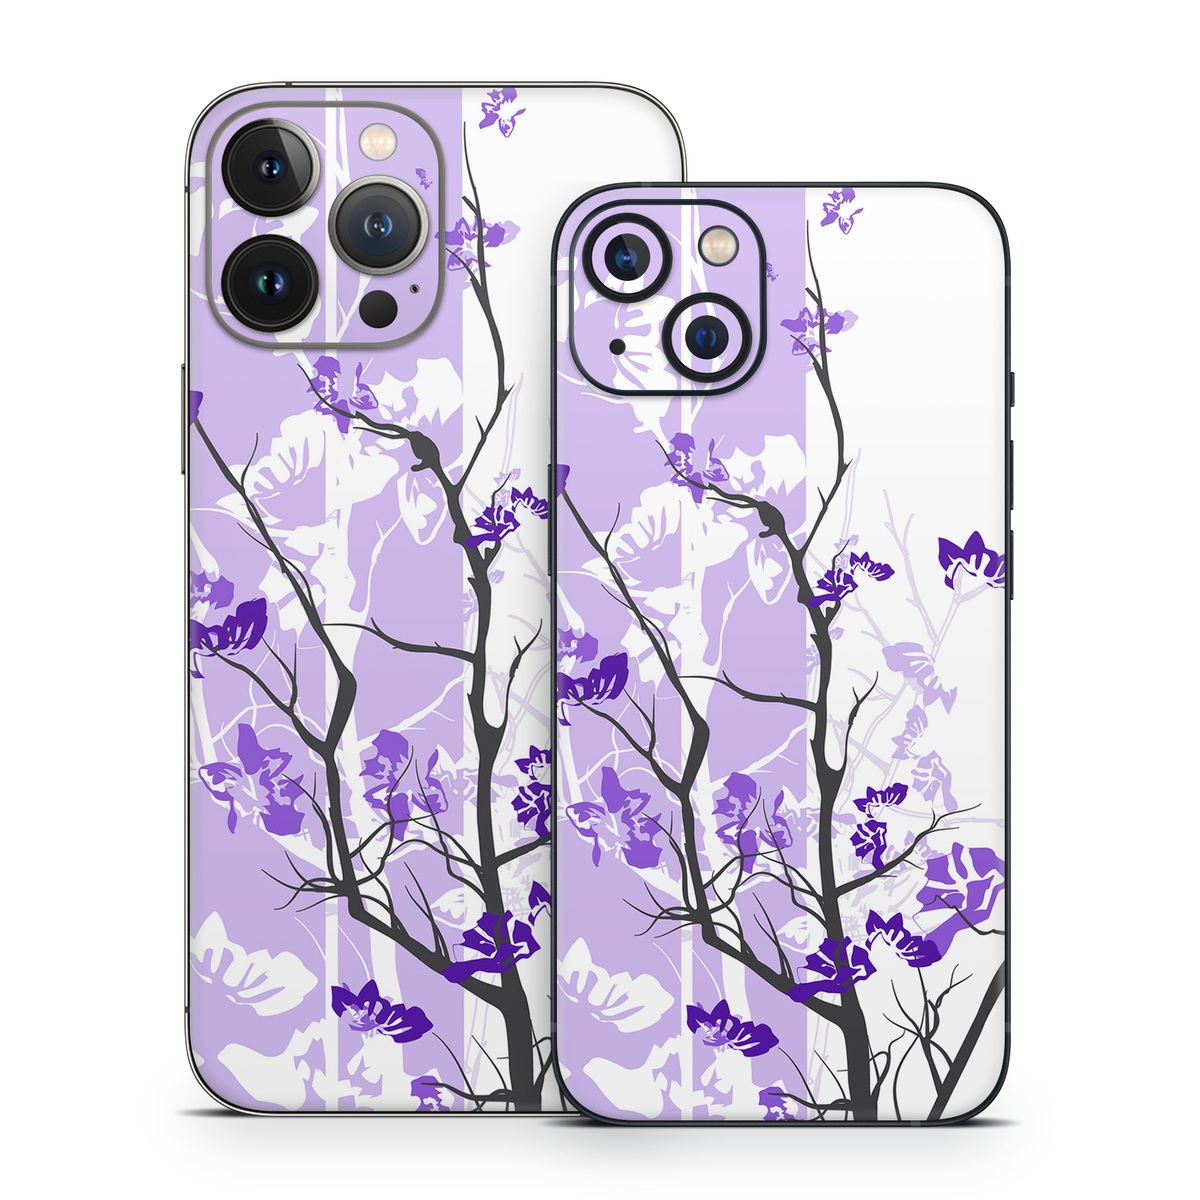 iPhone 13 Series Skin design of Branch, Purple, Violet, Lilac, Lavender, Plant, Twig, Flower, Tree, Wildflower, with white, purple, gray, pink, black colors